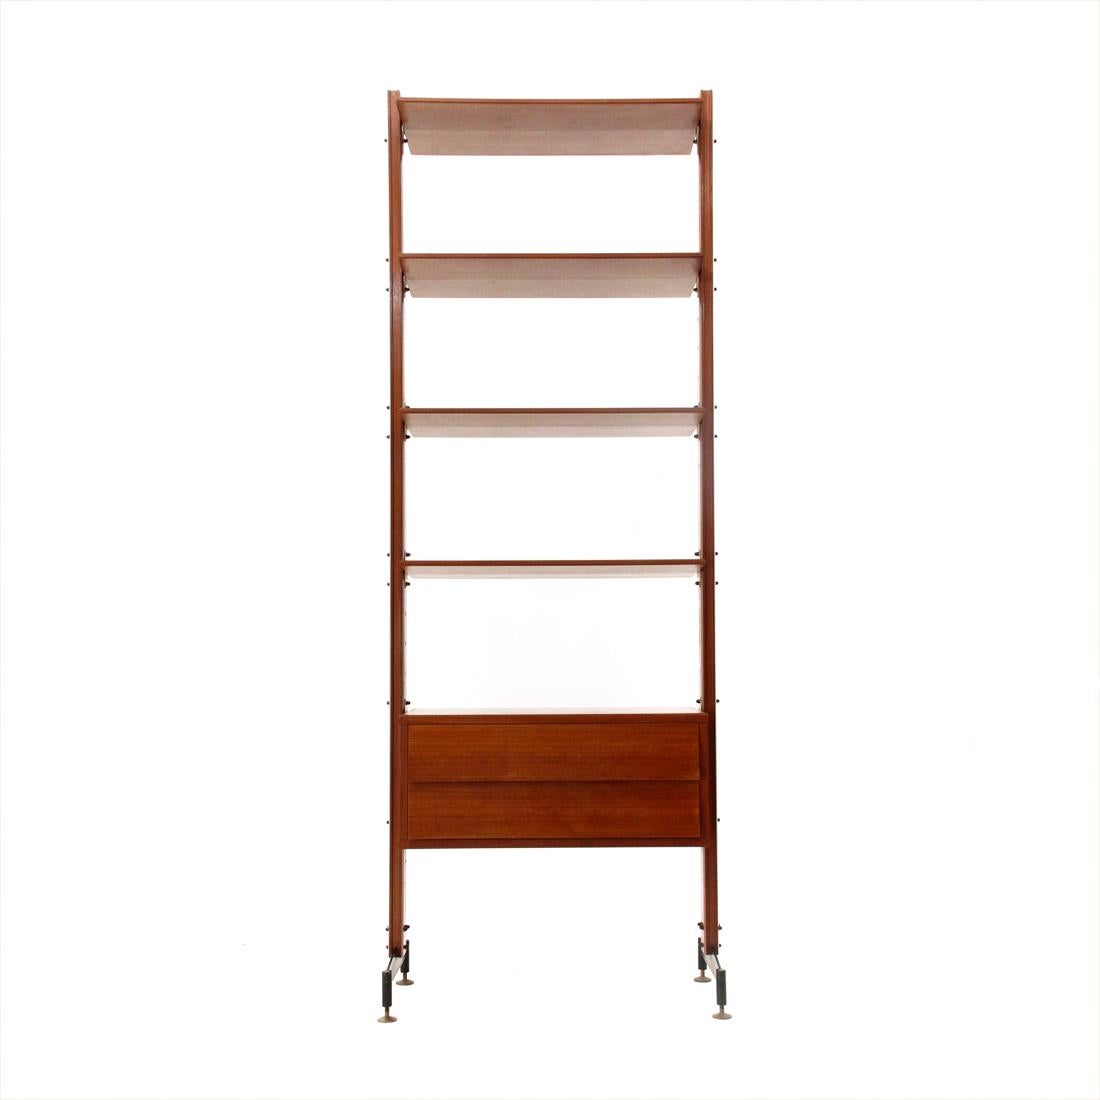 Italian-made bookcase produced in the 1950s.
Wooden uprights with black painted metal support system.
Height adjustable feet in brass.
Chest of drawers and shelves in veneered wood.
Shelves with tapered edges.
Good general condition, some signs